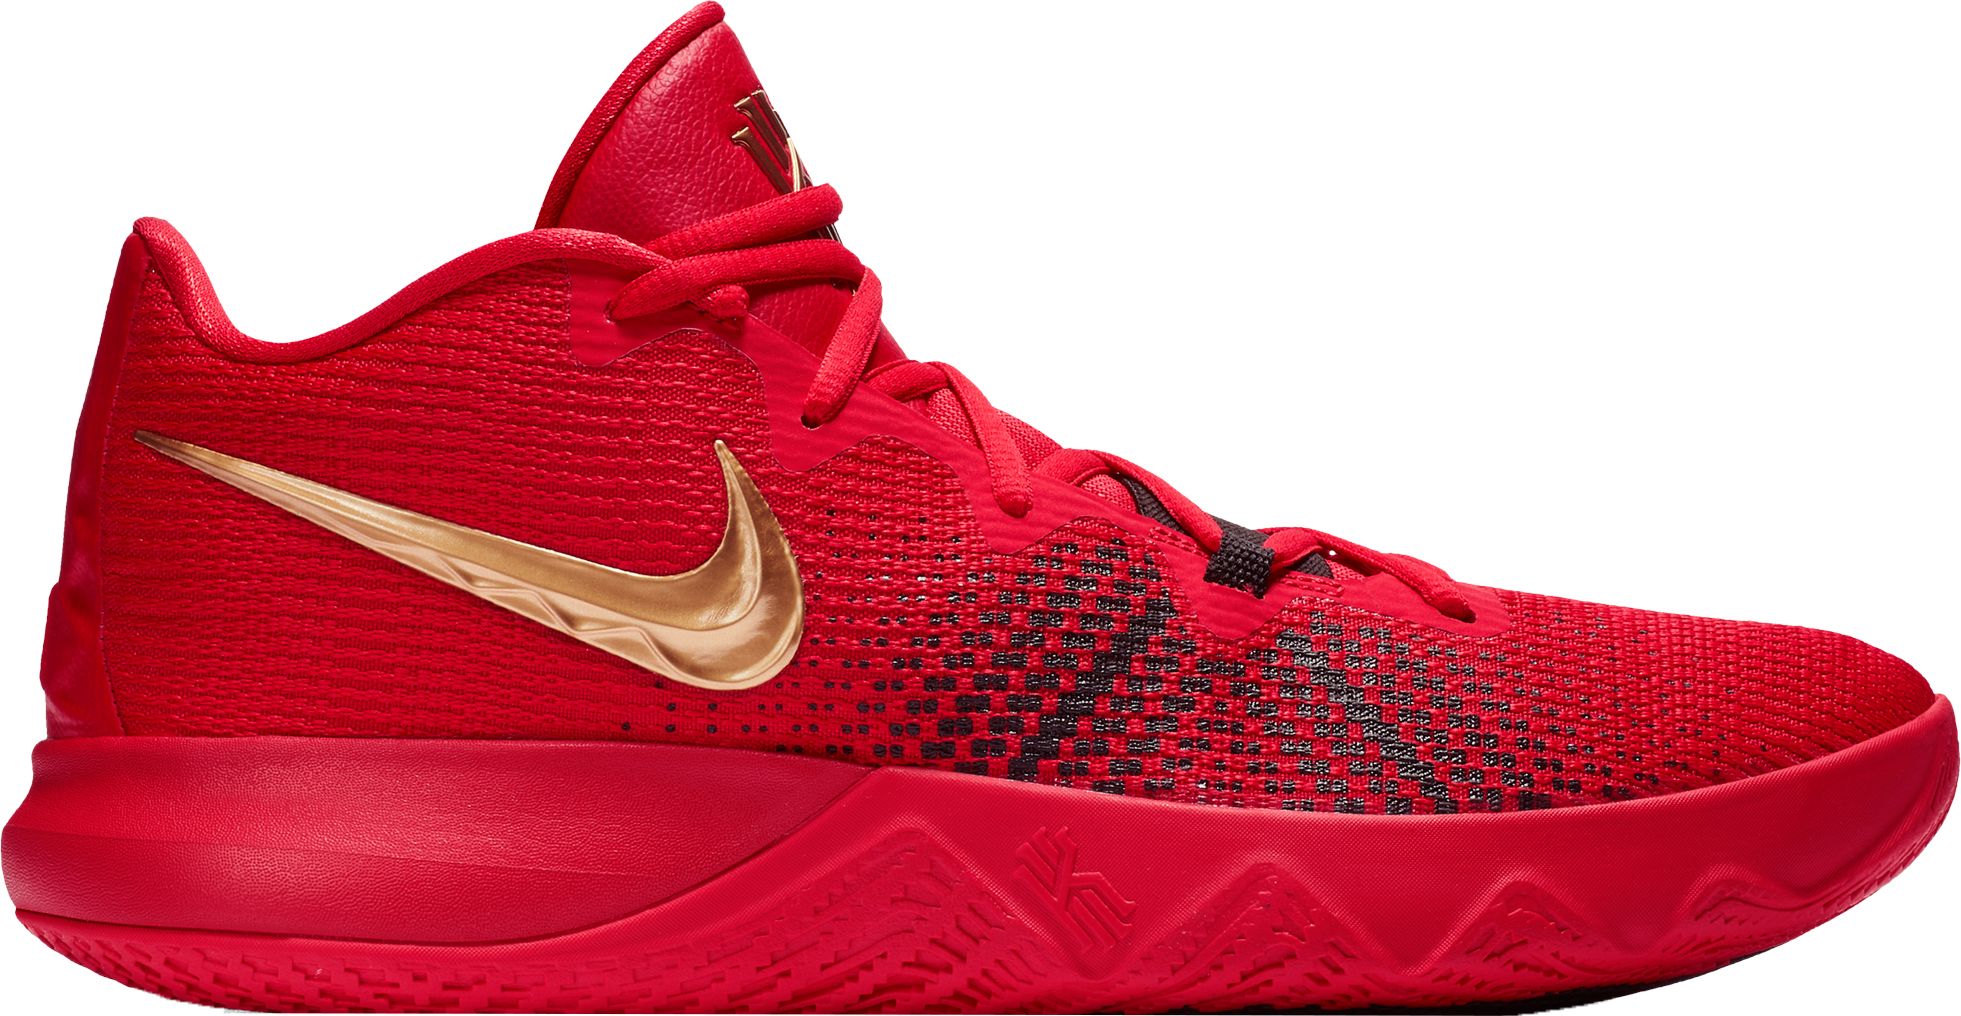 Red Nike Shoes | Best Price Guarantee at DICK'S